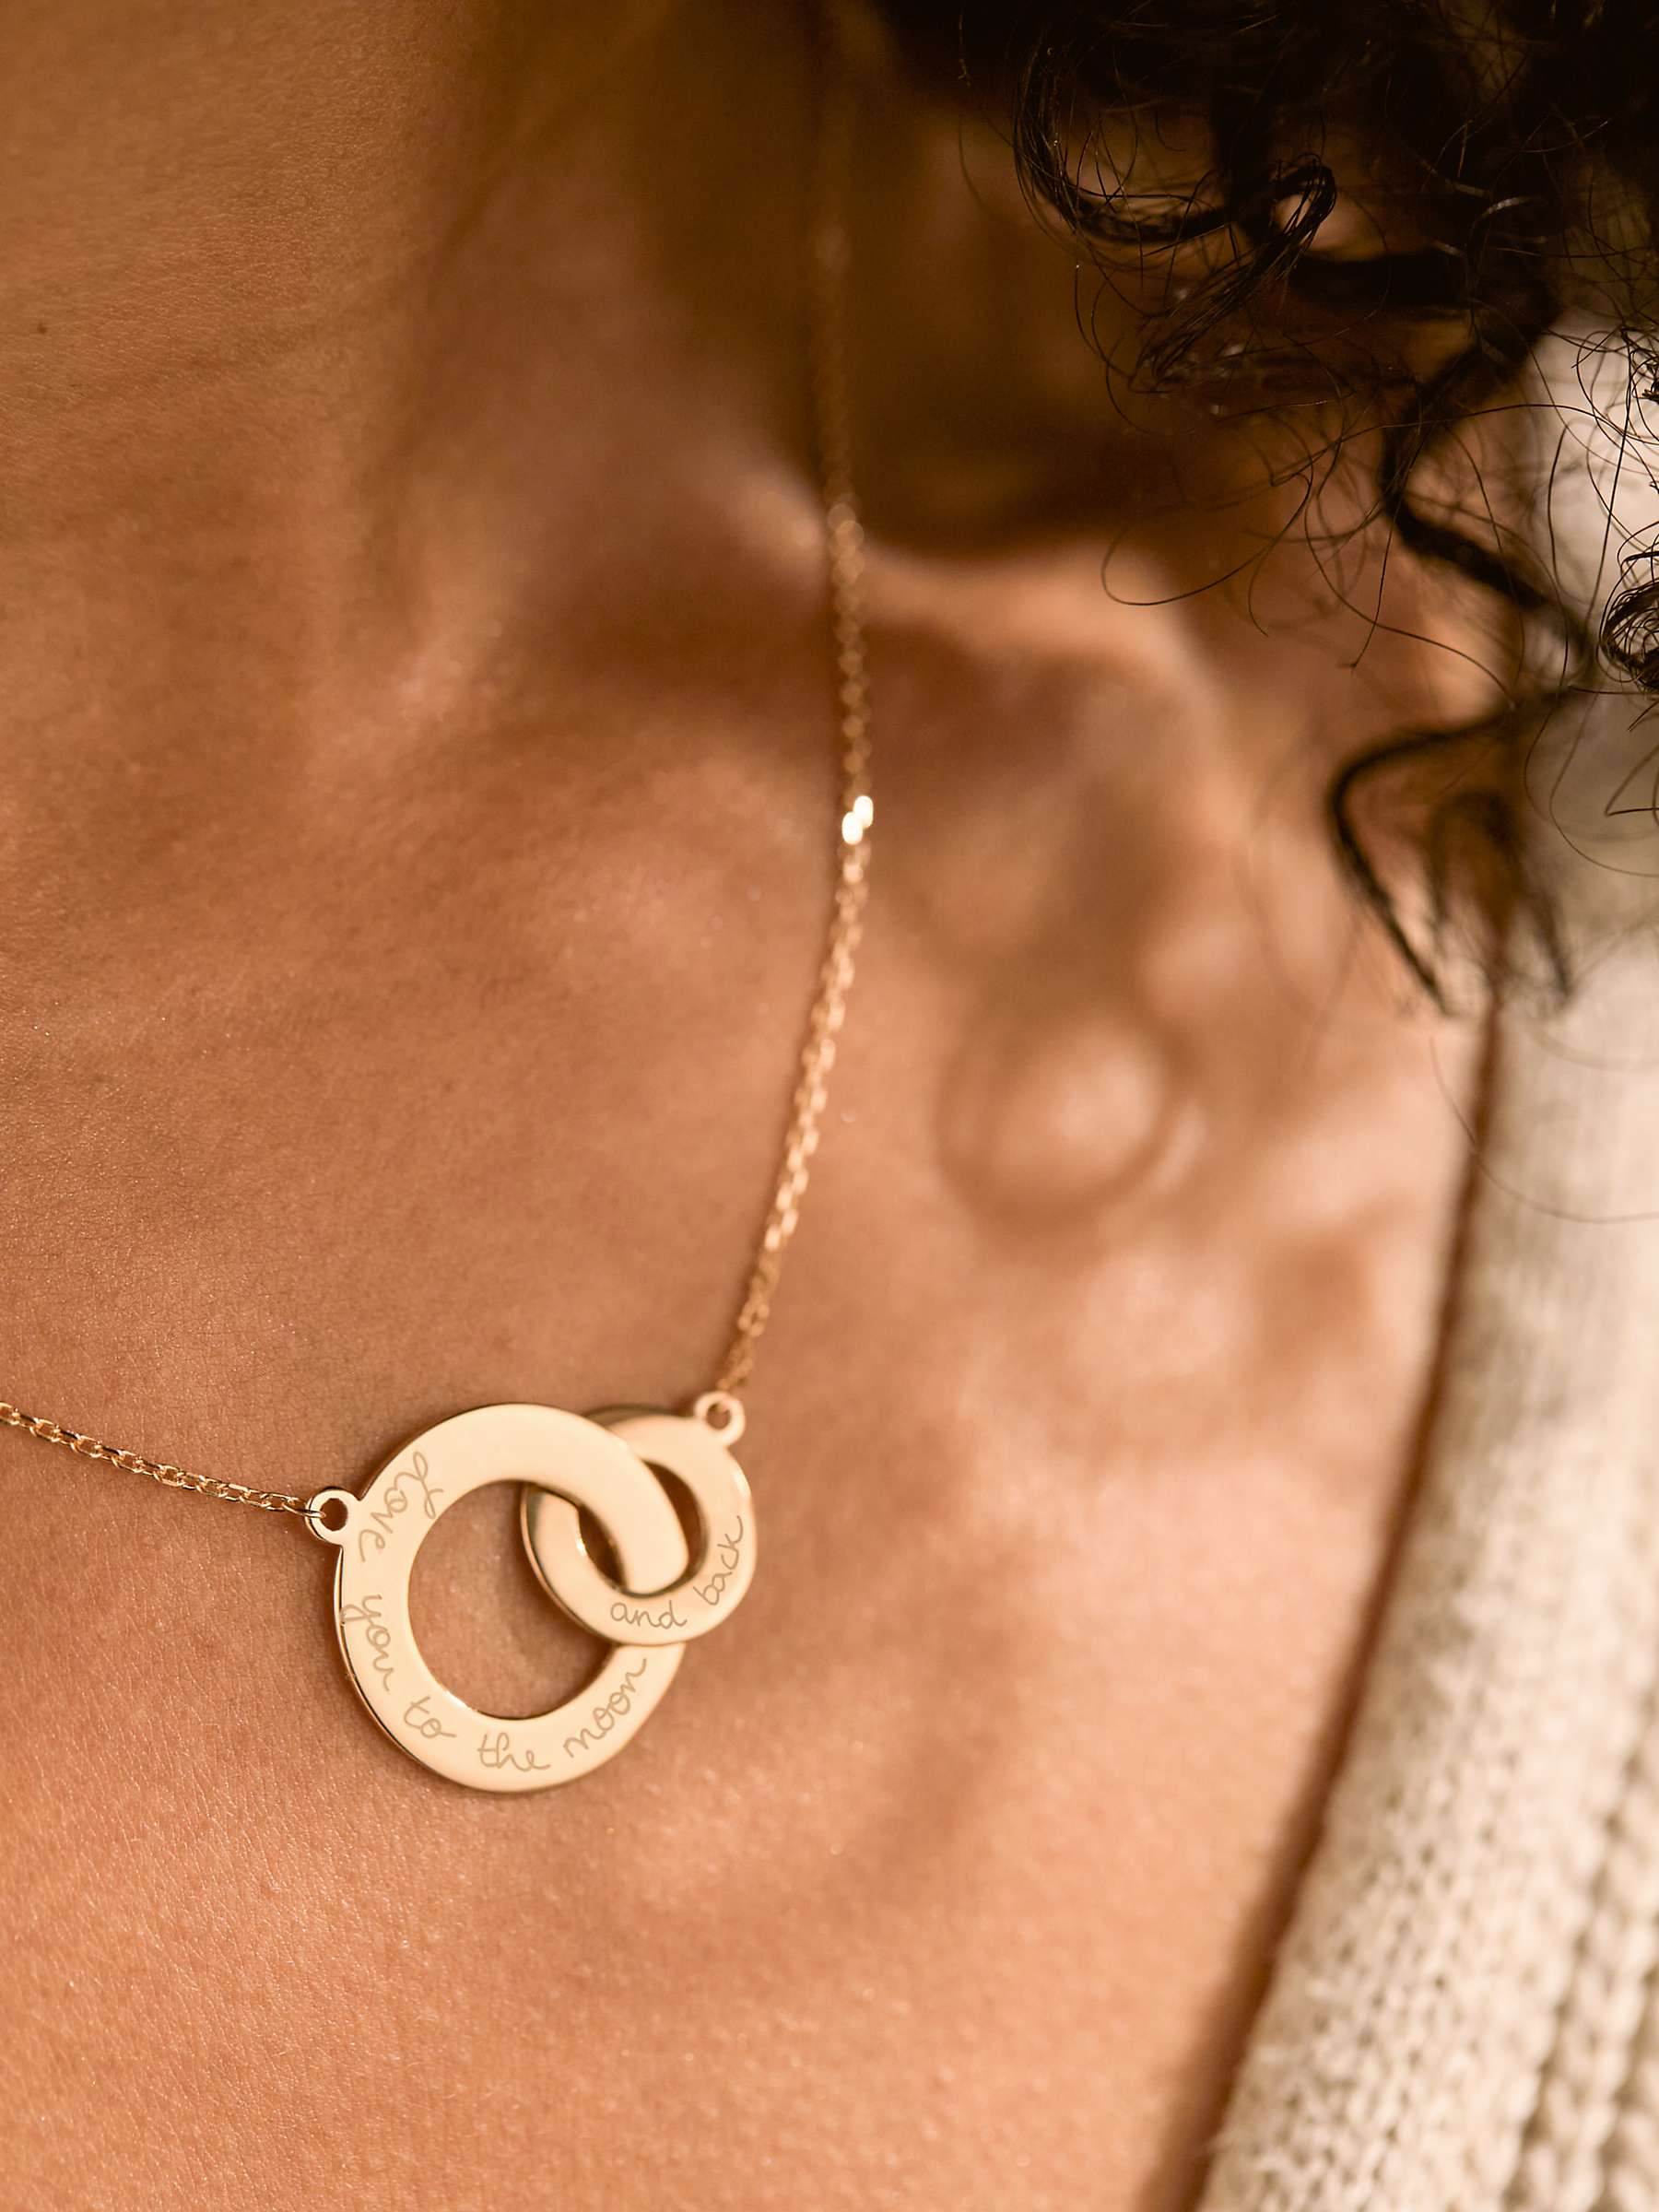 Buy Merci Maman Personalised Intertwined Charm Necklace Online at johnlewis.com